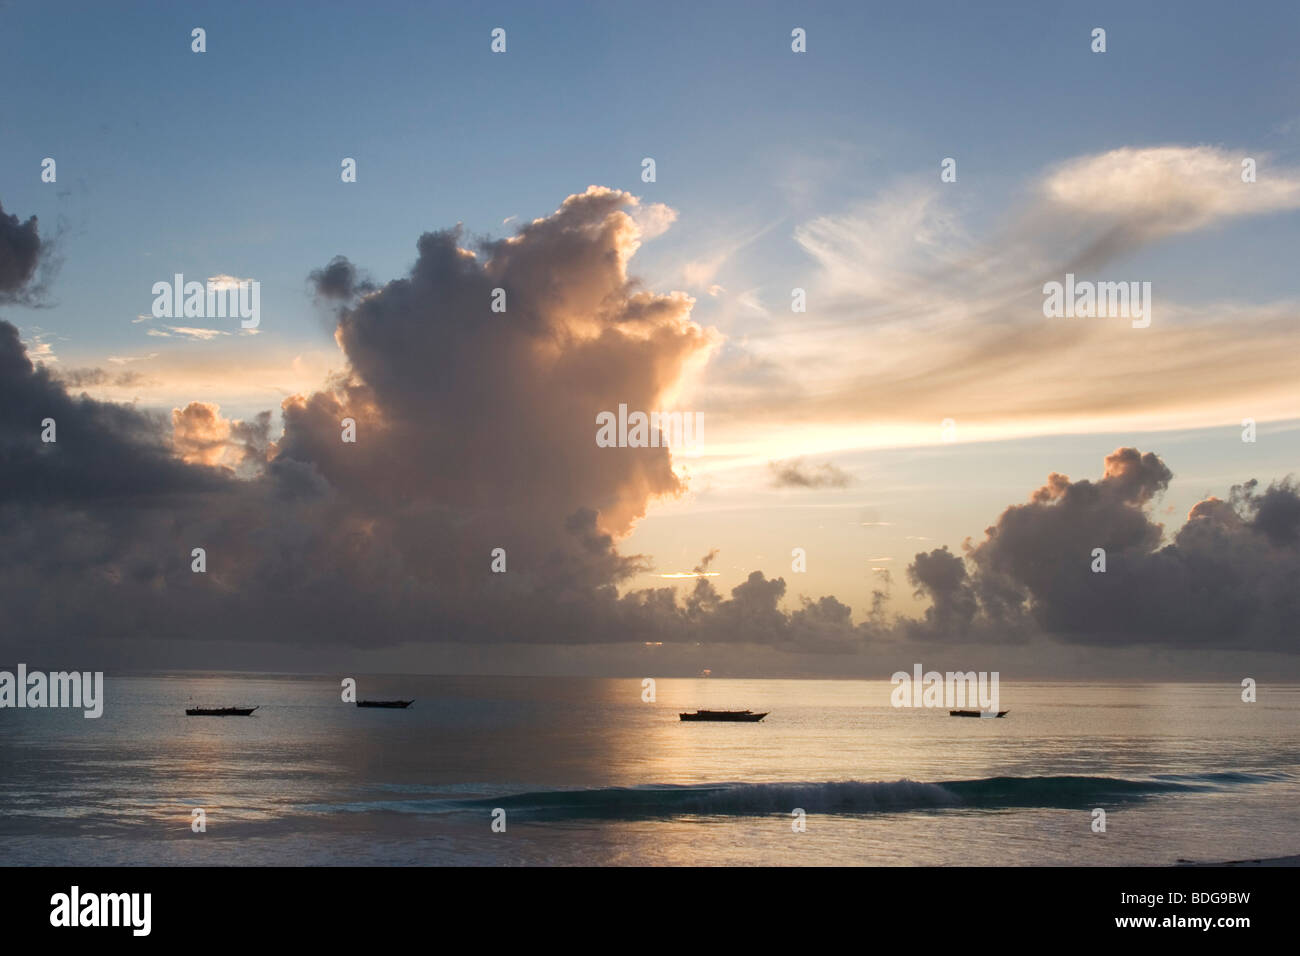 Billowing clouds at a dawn sunrise over Paje Beach, Zanzibar. Dramatic golden clouds form in the sky over the ocean. Stock Photo